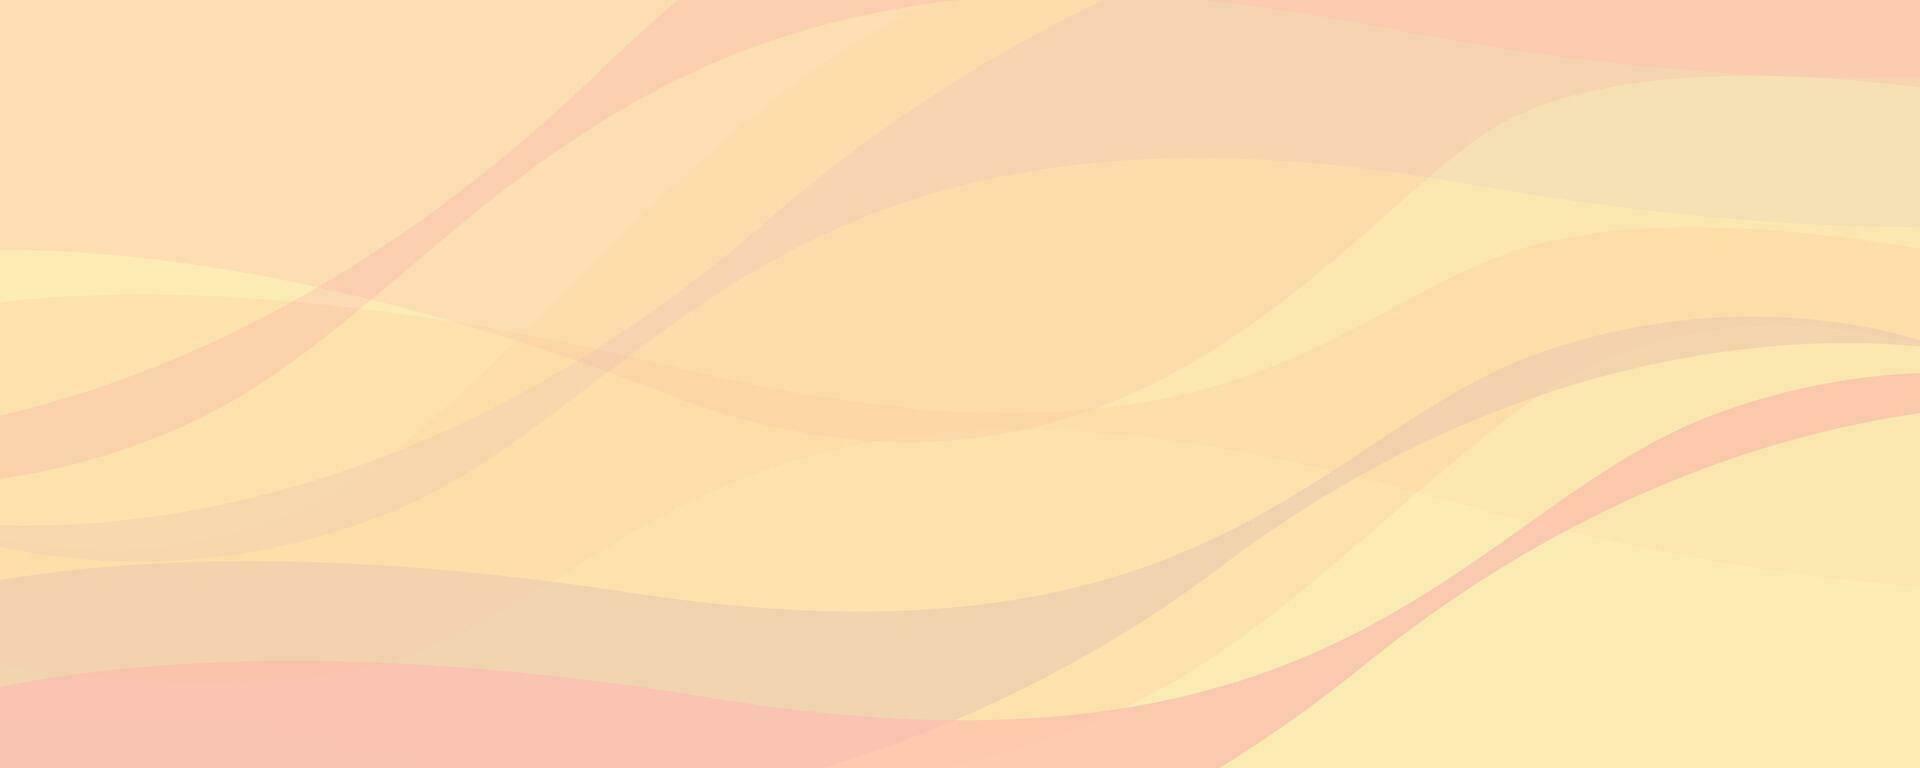 Abstract background with wavy lines in pastel colors. Vector illustration.